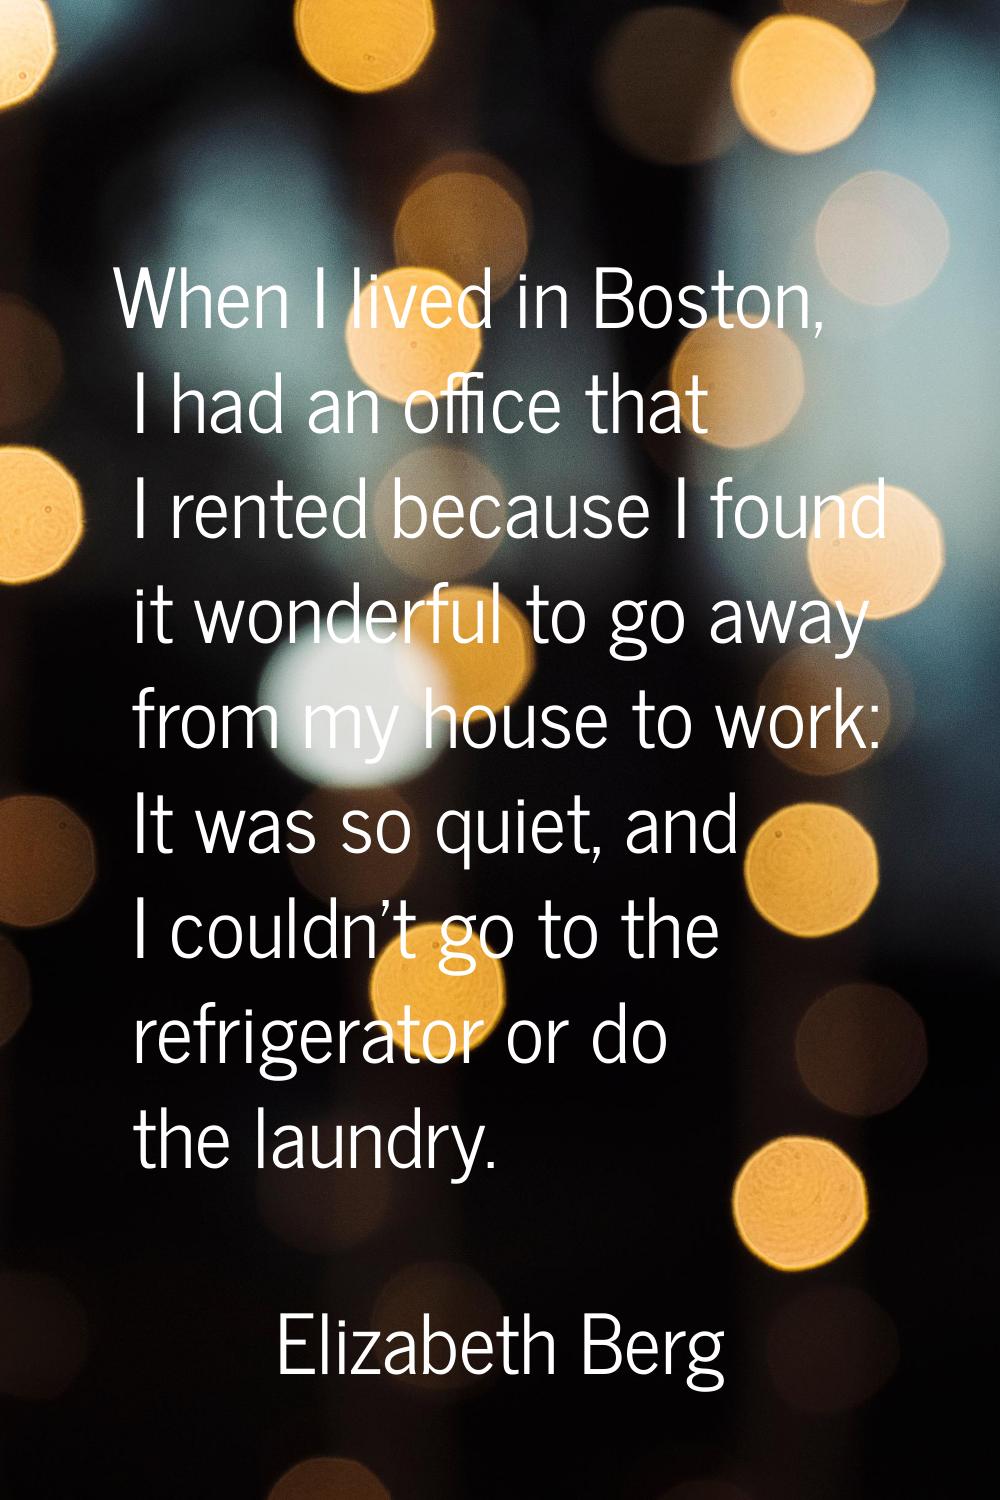 When I lived in Boston, I had an office that I rented because I found it wonderful to go away from 